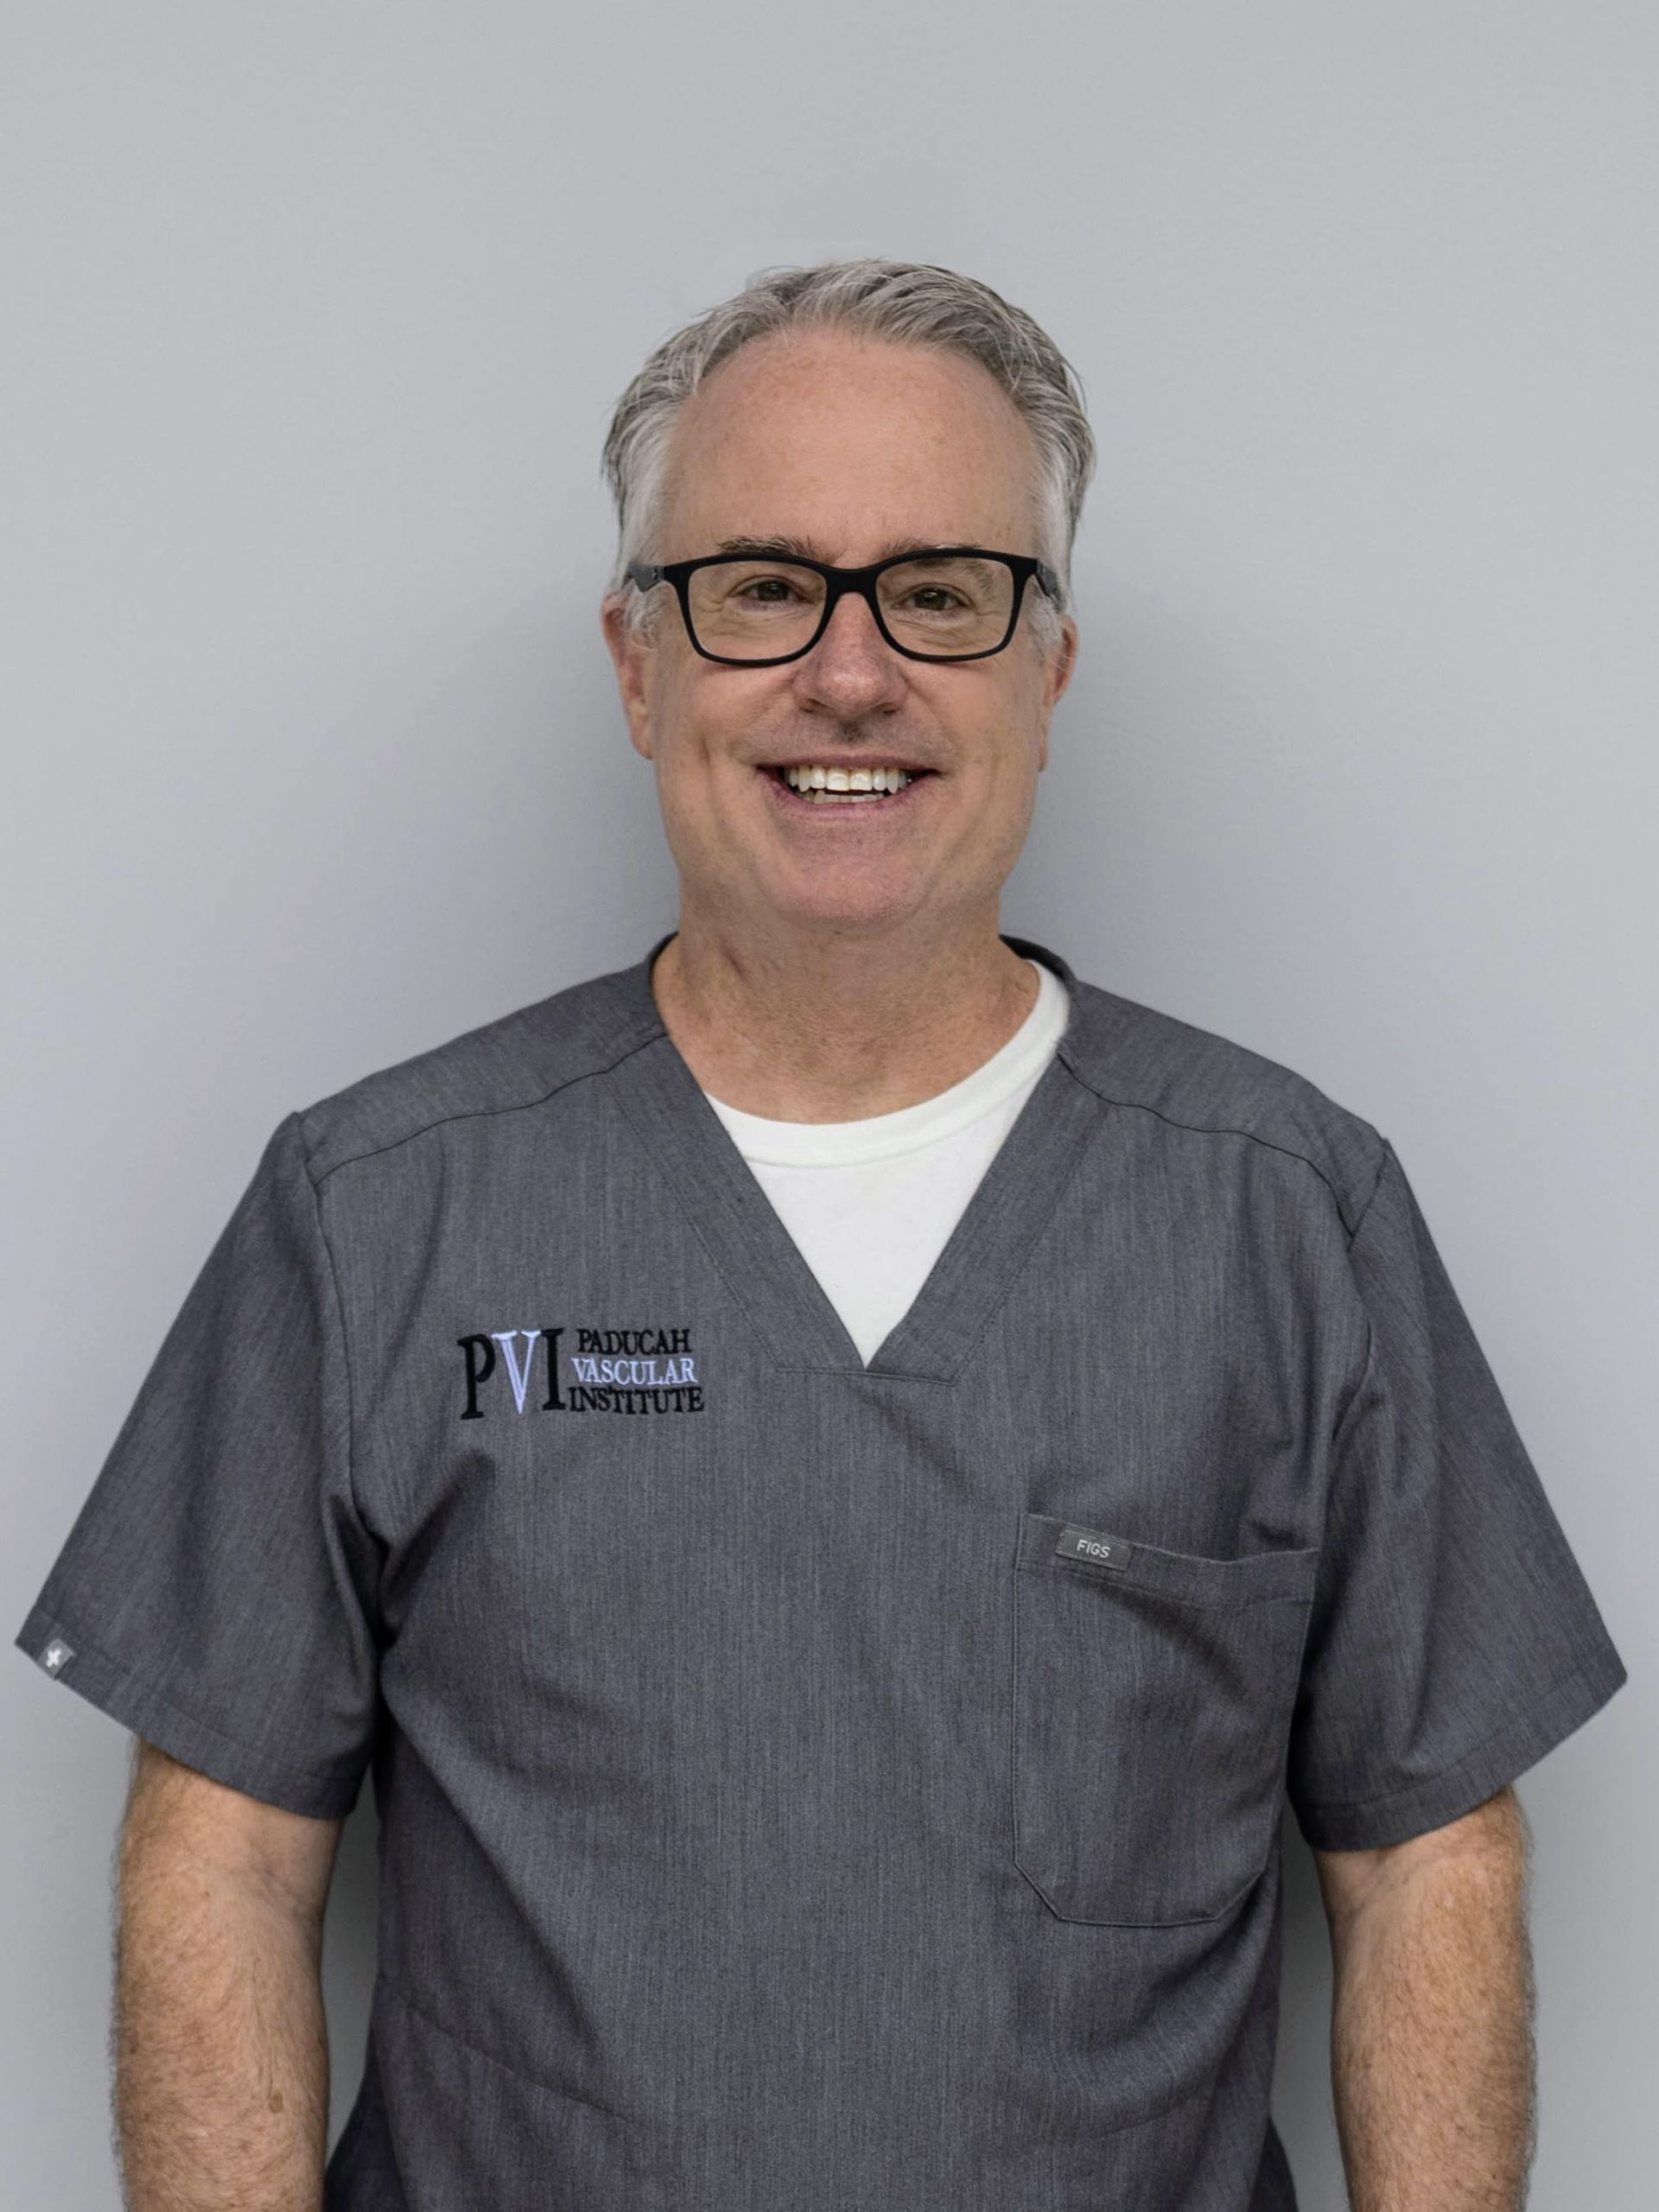 Dr. Scott Sanders, a man wearing glasses and a scrub shirt that has the paducah vascular institute logo on it